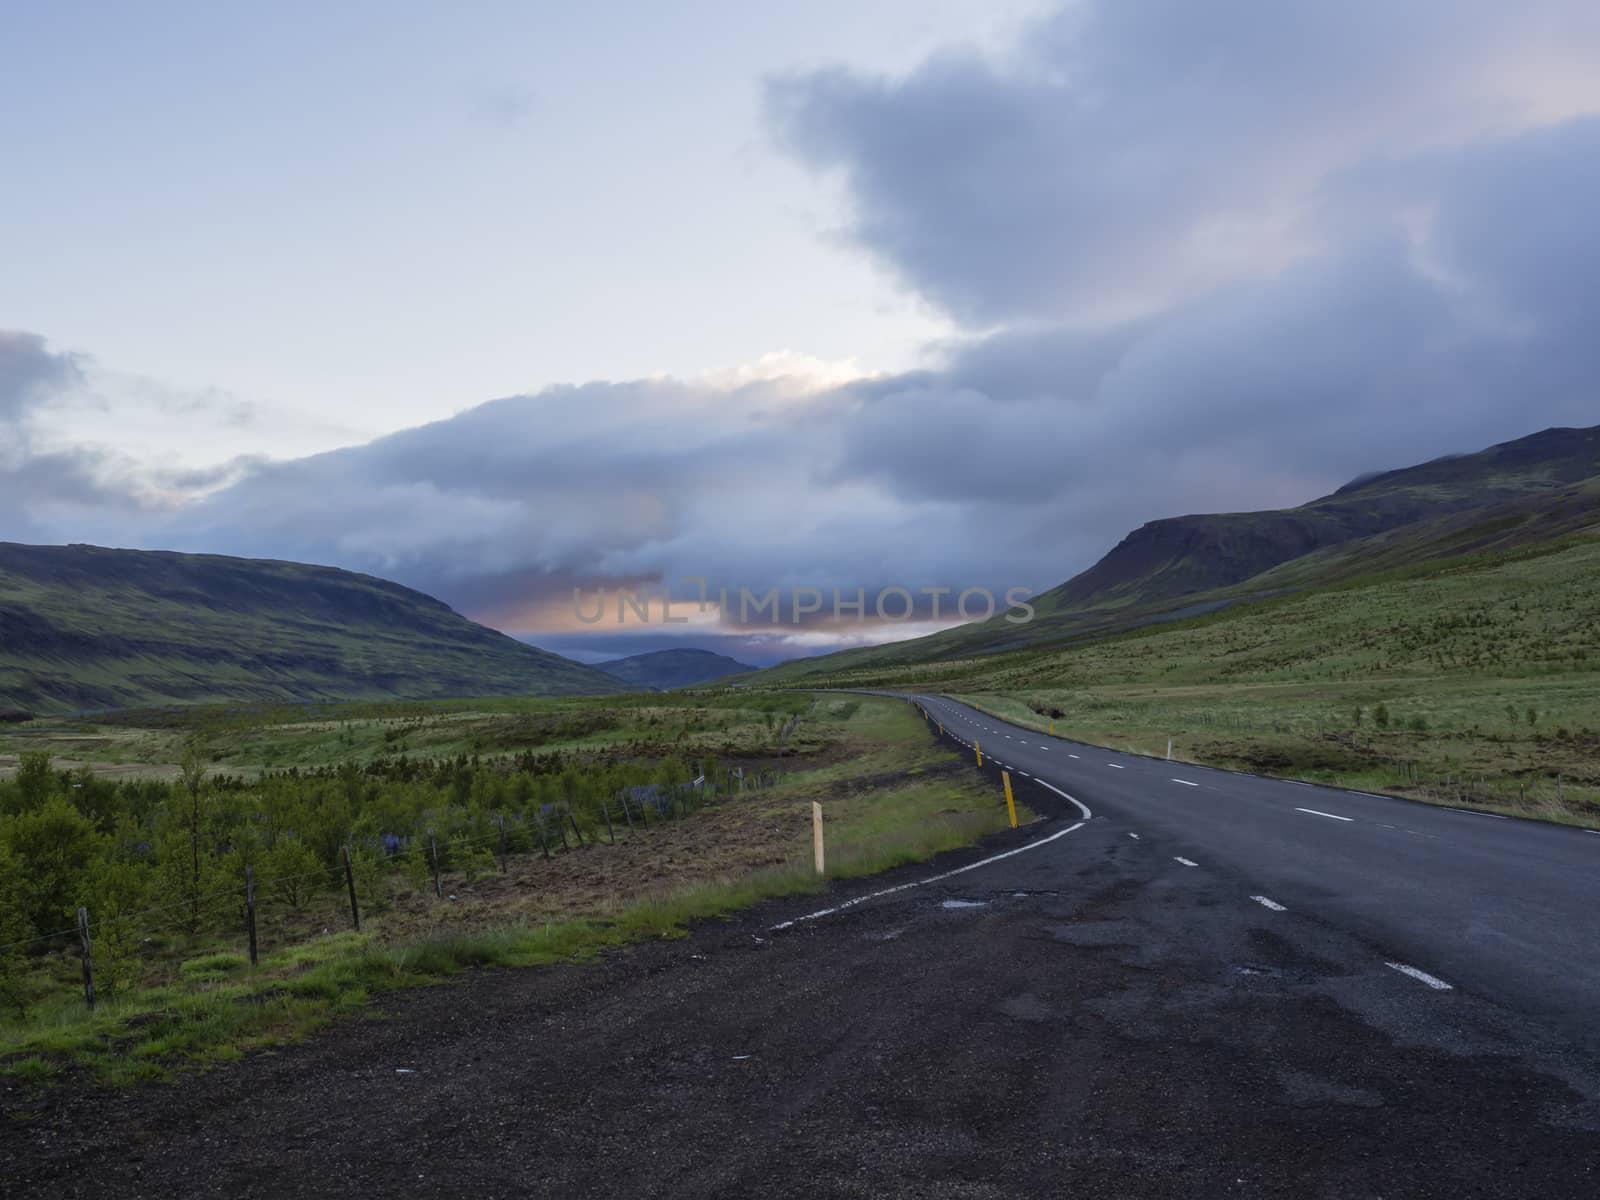 Asphalt road curve through empty northern landscape with green grass colorful hills and sunset dramatic sky, way to the mountains in Iceland western highlands, copy space